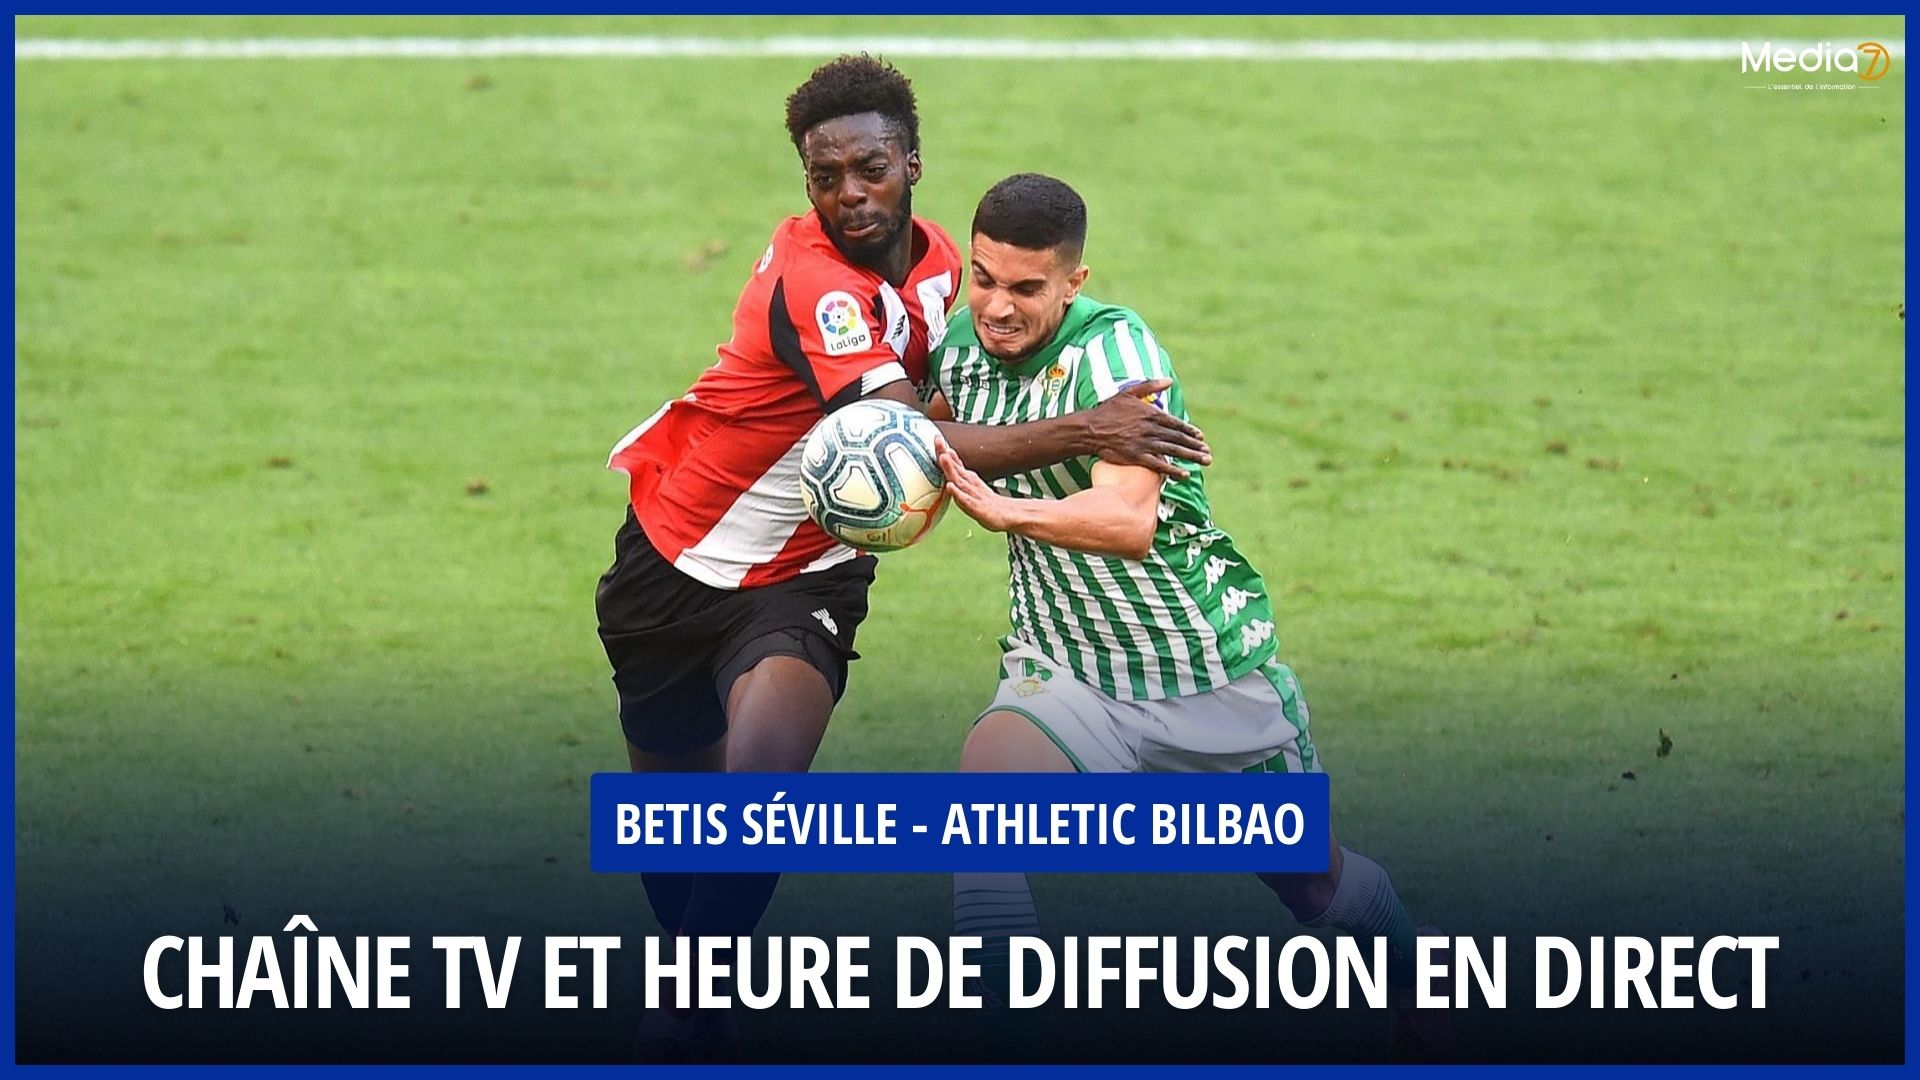 Match Betis Sevilla - Athletic Bilbao Live: TV Channel and Broadcast Schedule - Media7